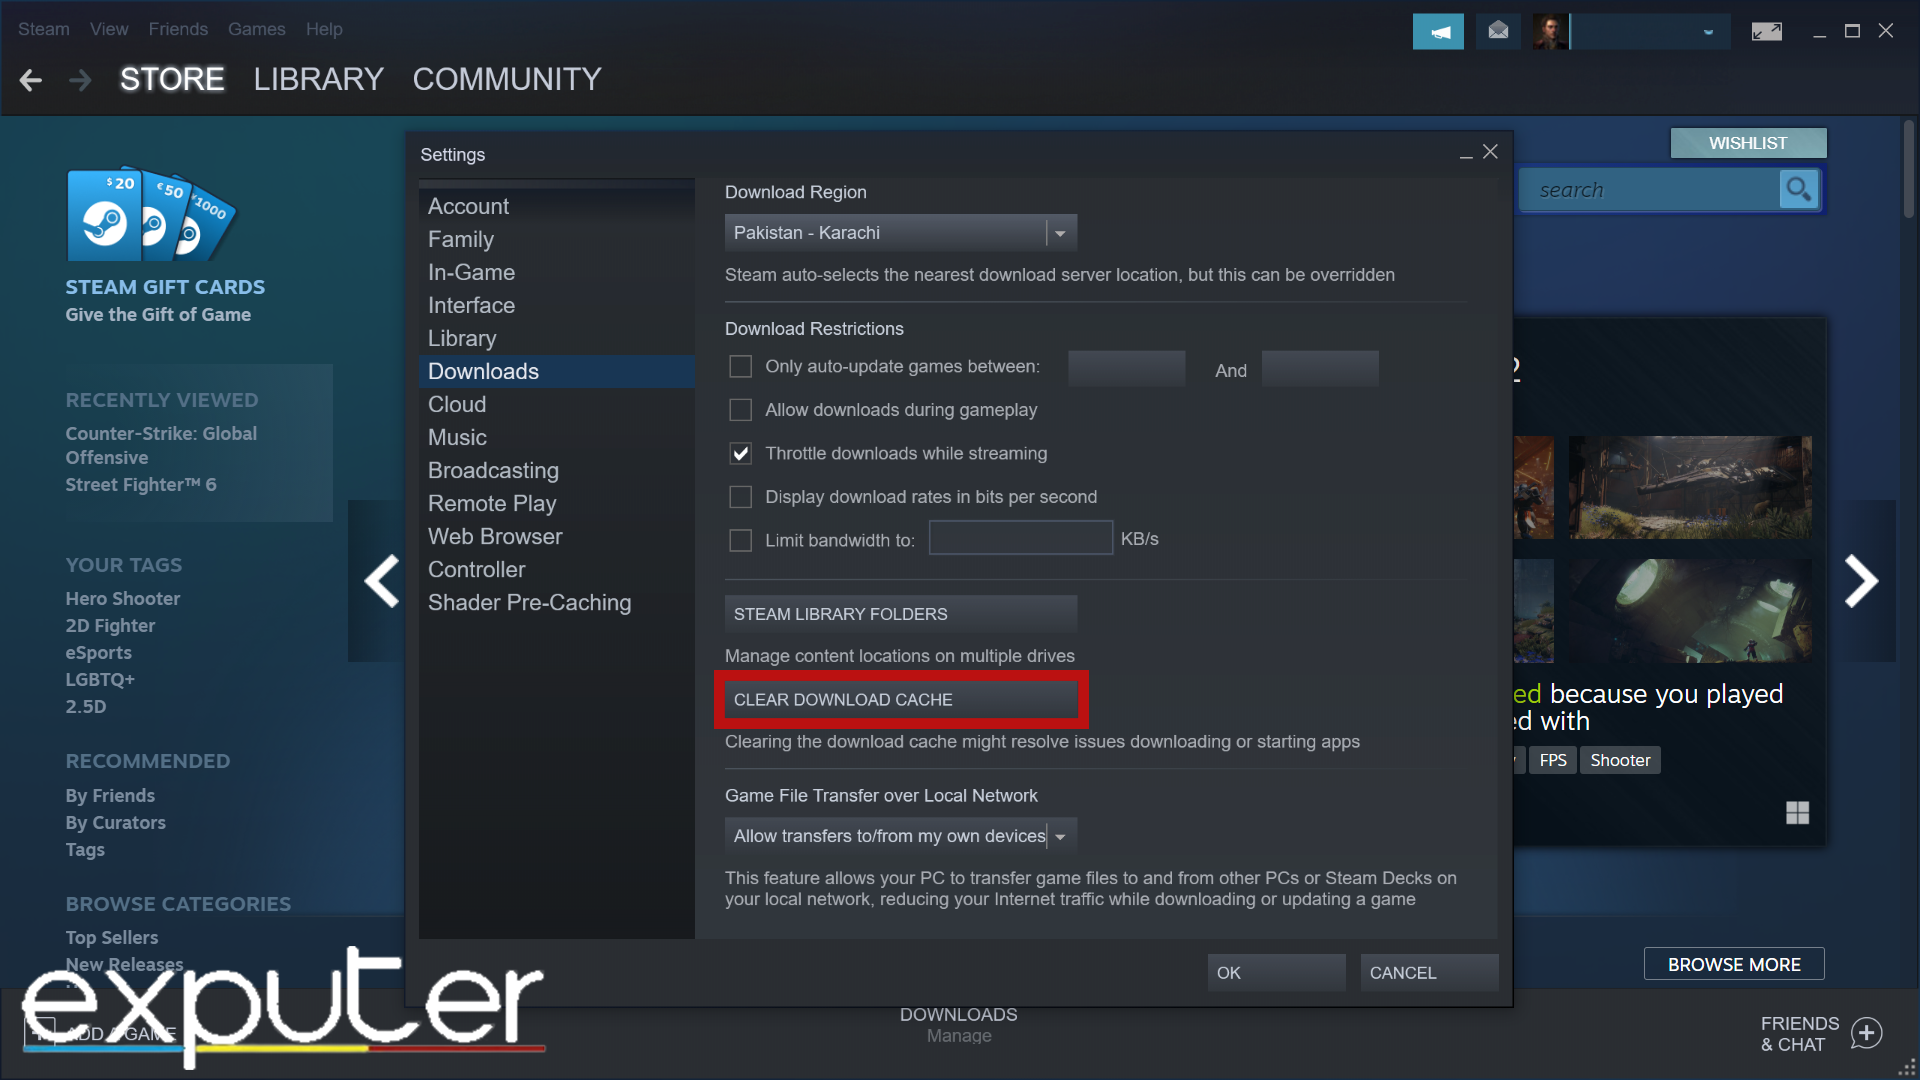 Clearing Download Cache of Steam. (image by eXputer)